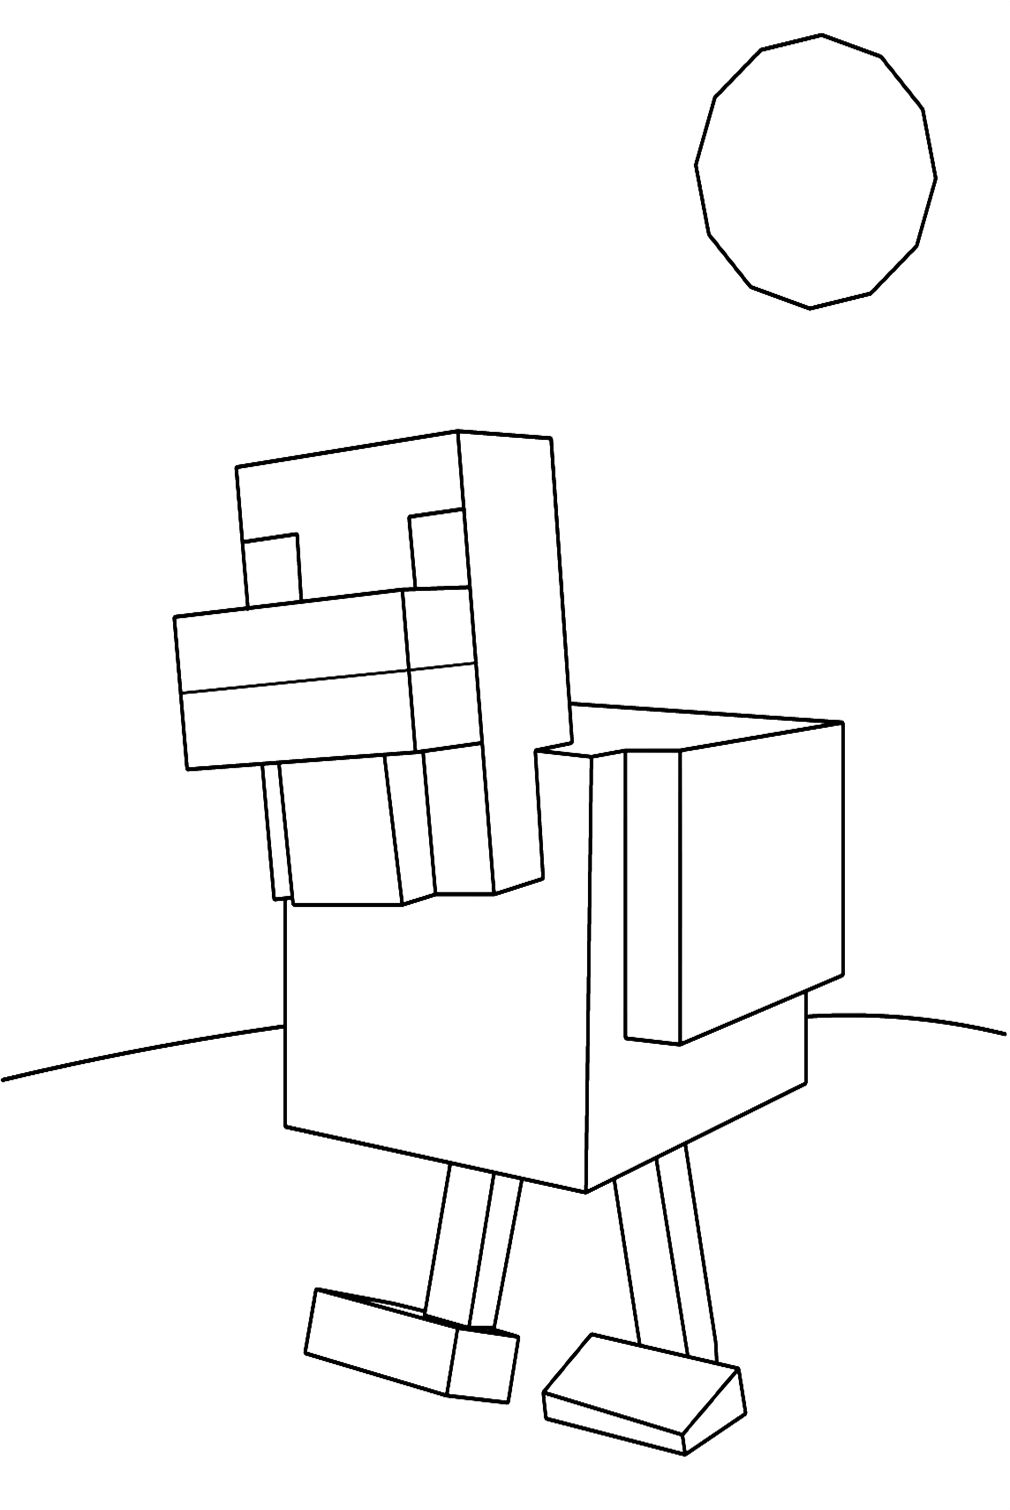 Minecraft Chicken Coloring Pages